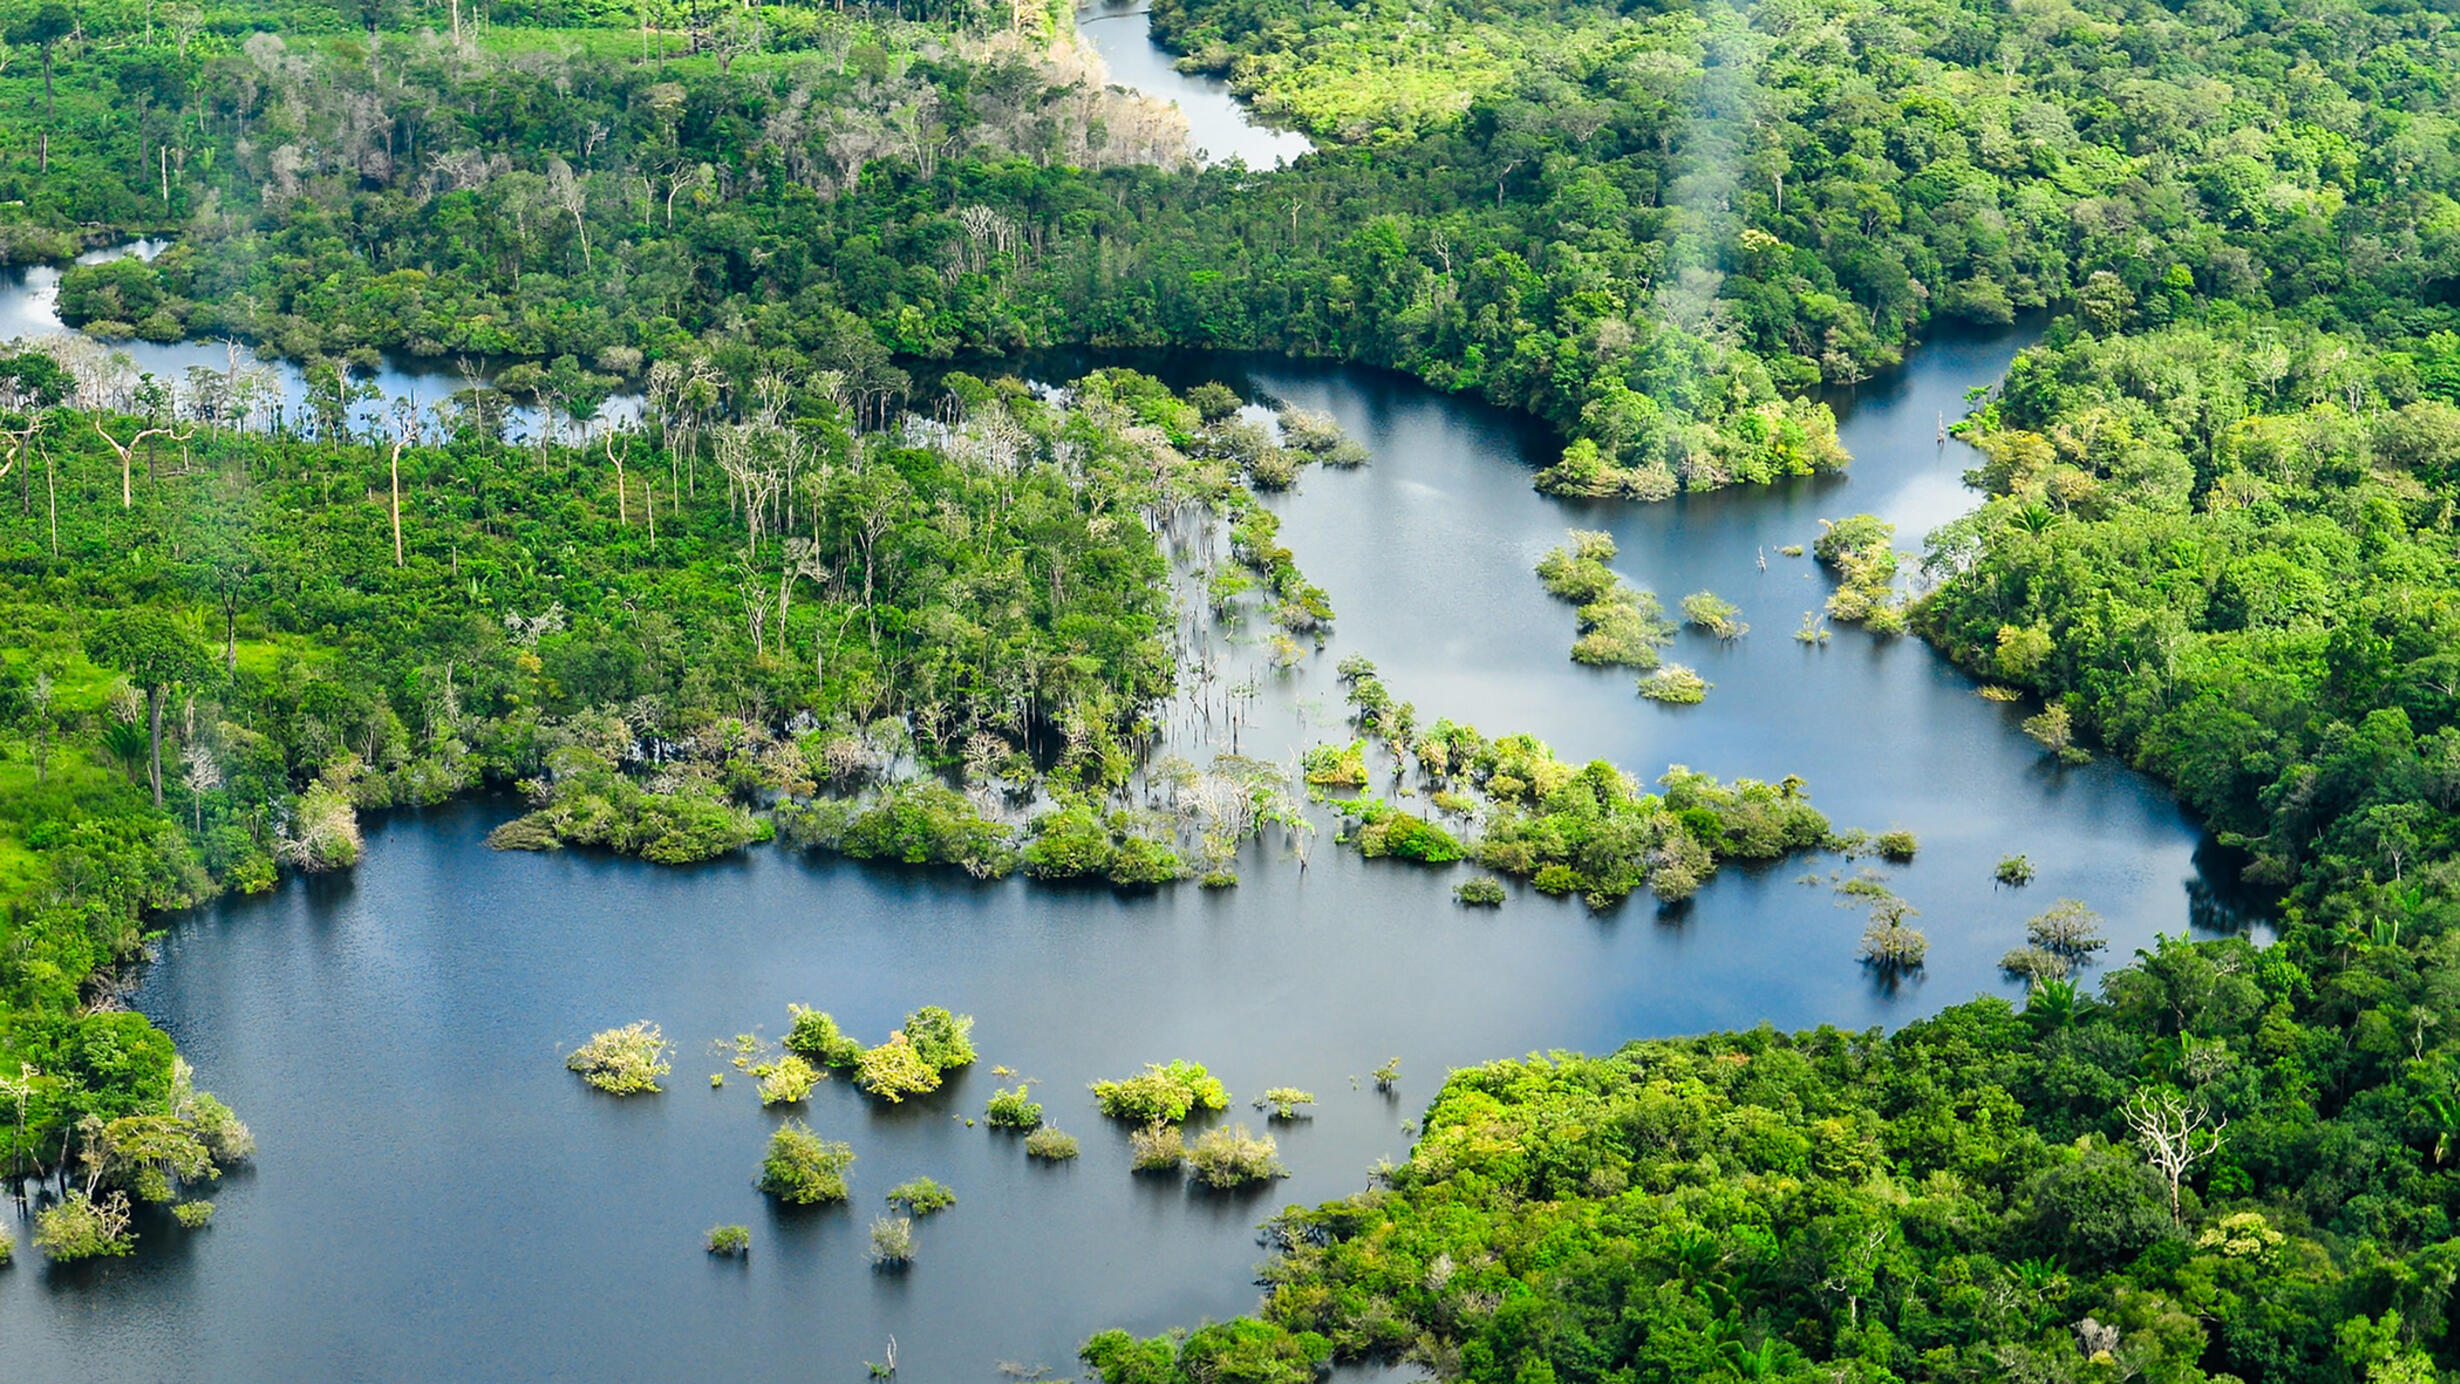 Aerial view of Amazon Rainforest with multiple waterways.